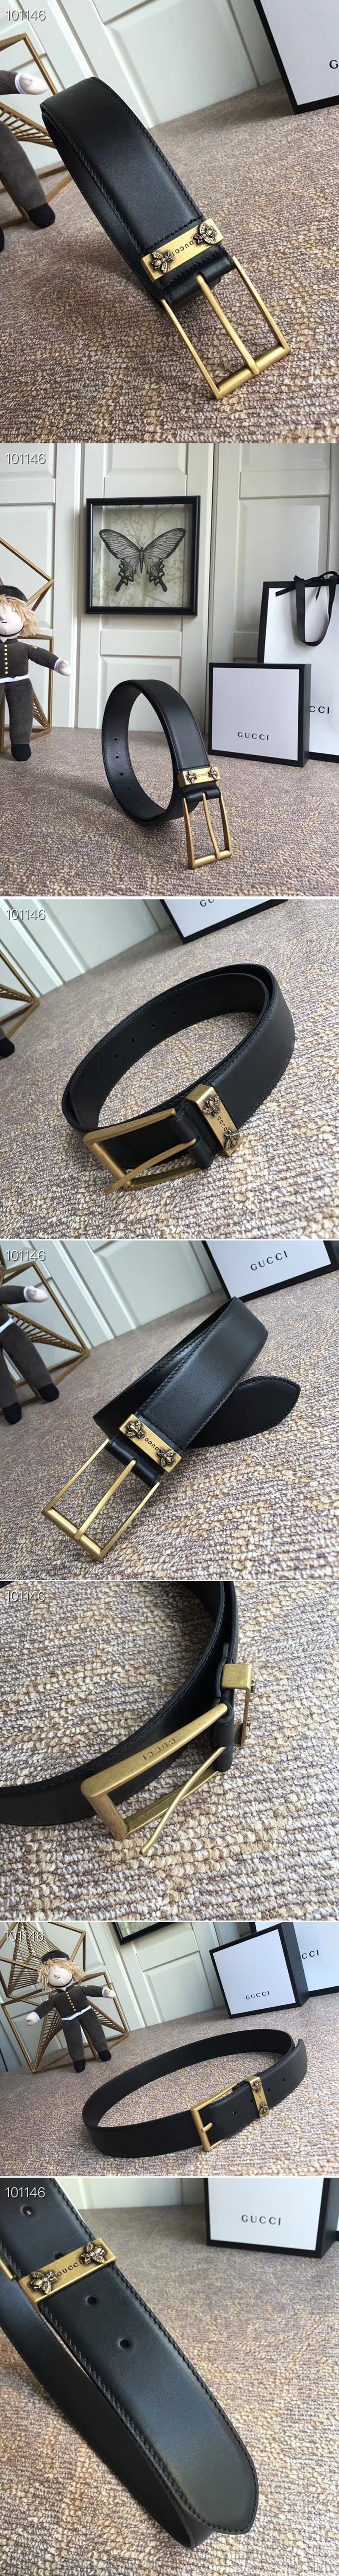 Replica Gucci 474811 4cm Leather belt Gold Bee buckle in Black leather